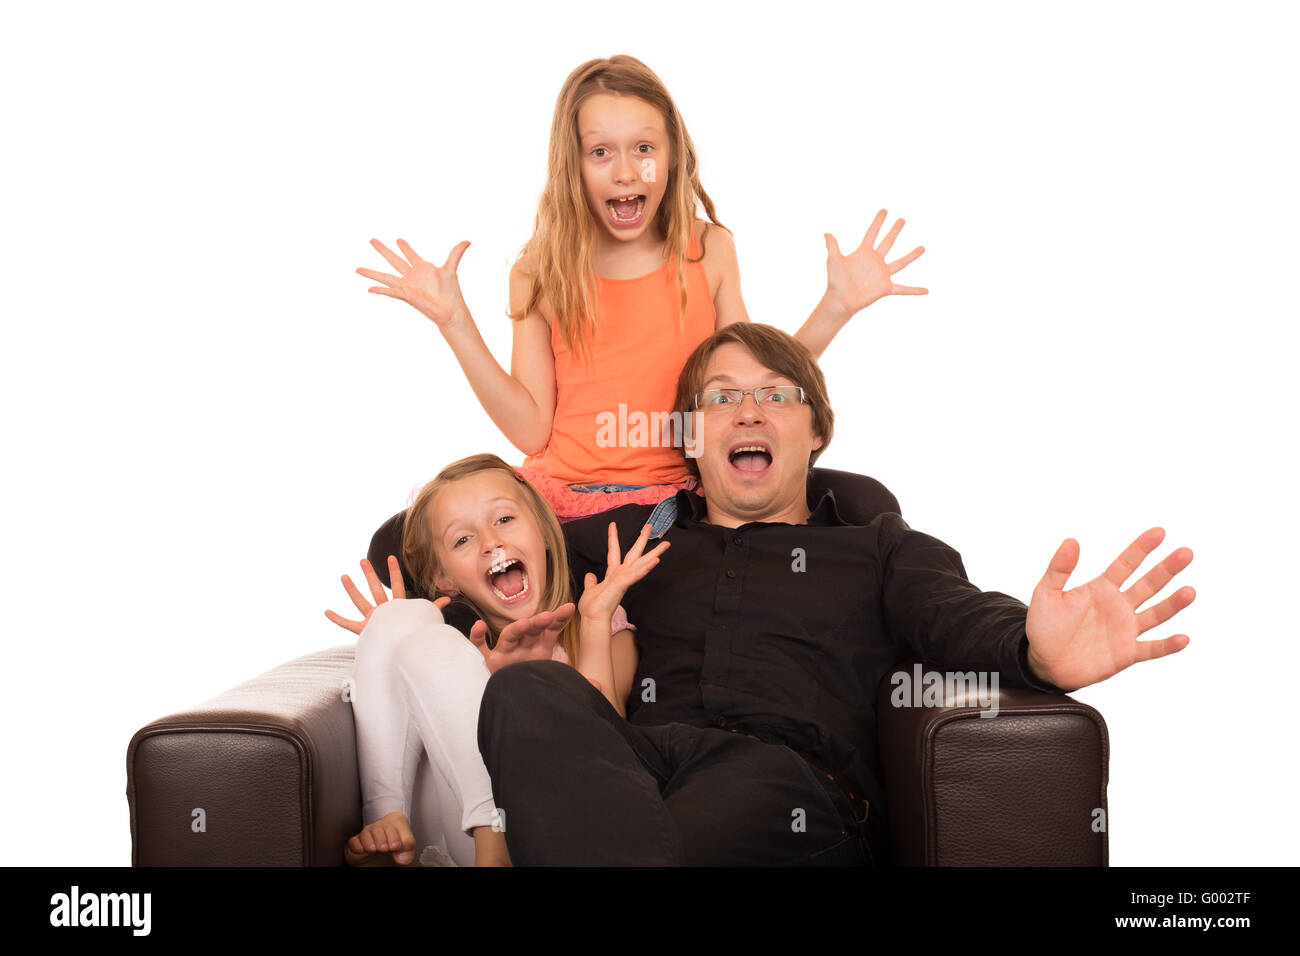 Crazy people crying and laughing Stock Photo